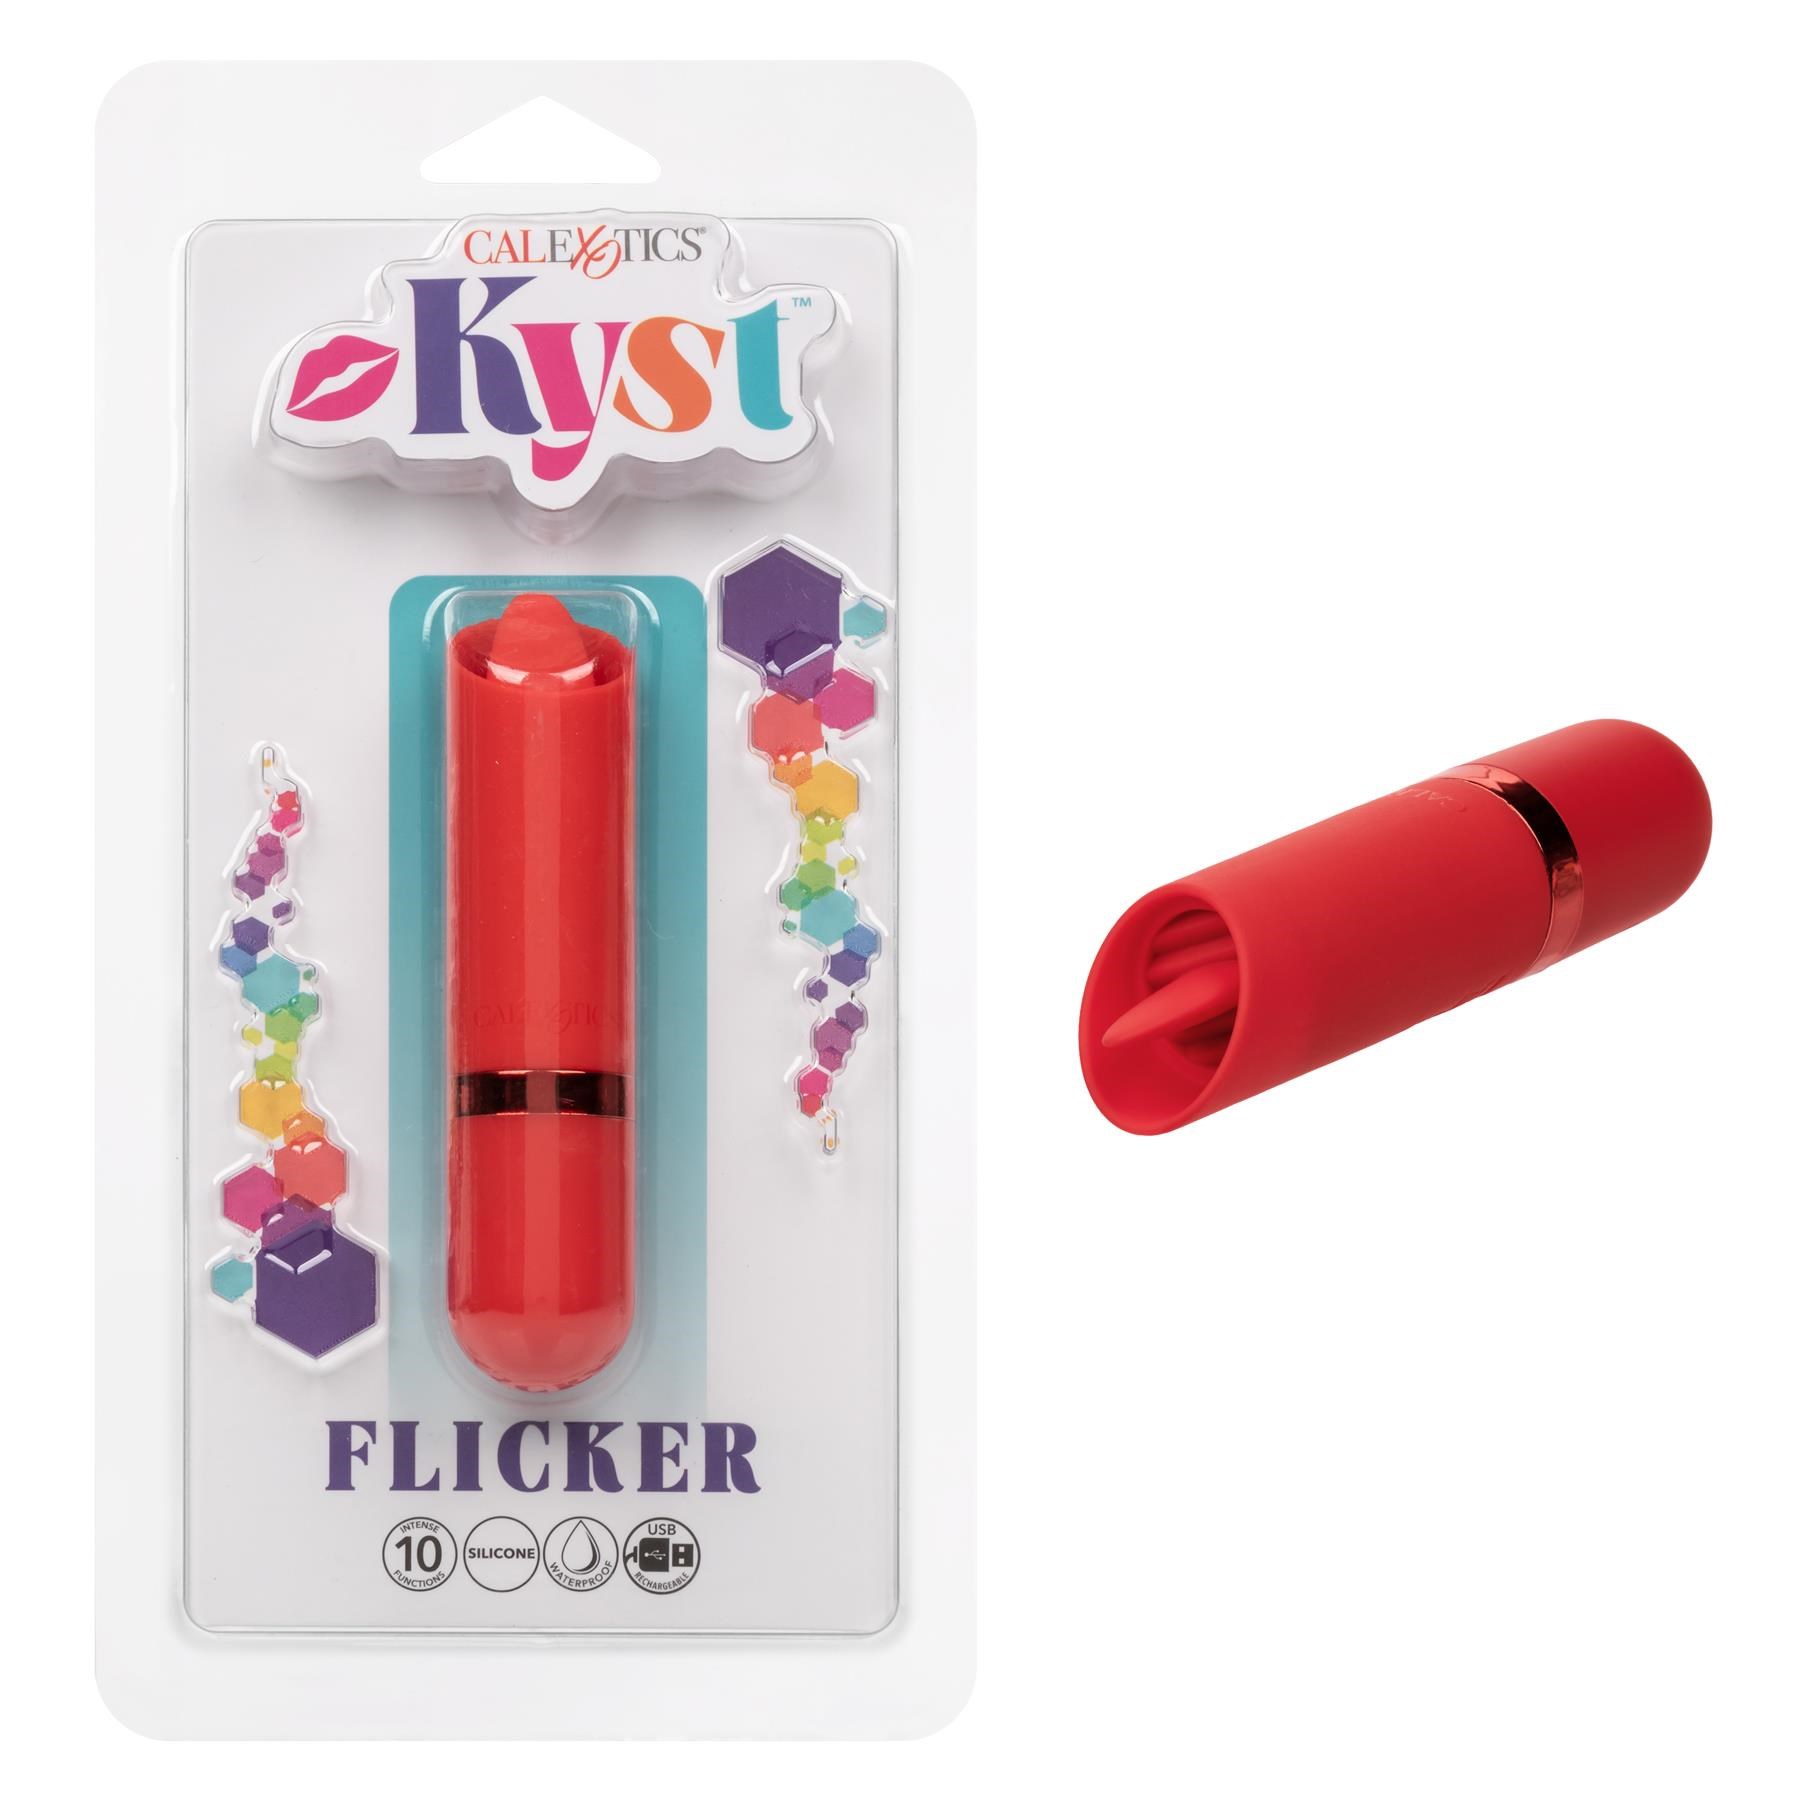 Kyst Flicker Clitoral Stimulator - Product and Packaging